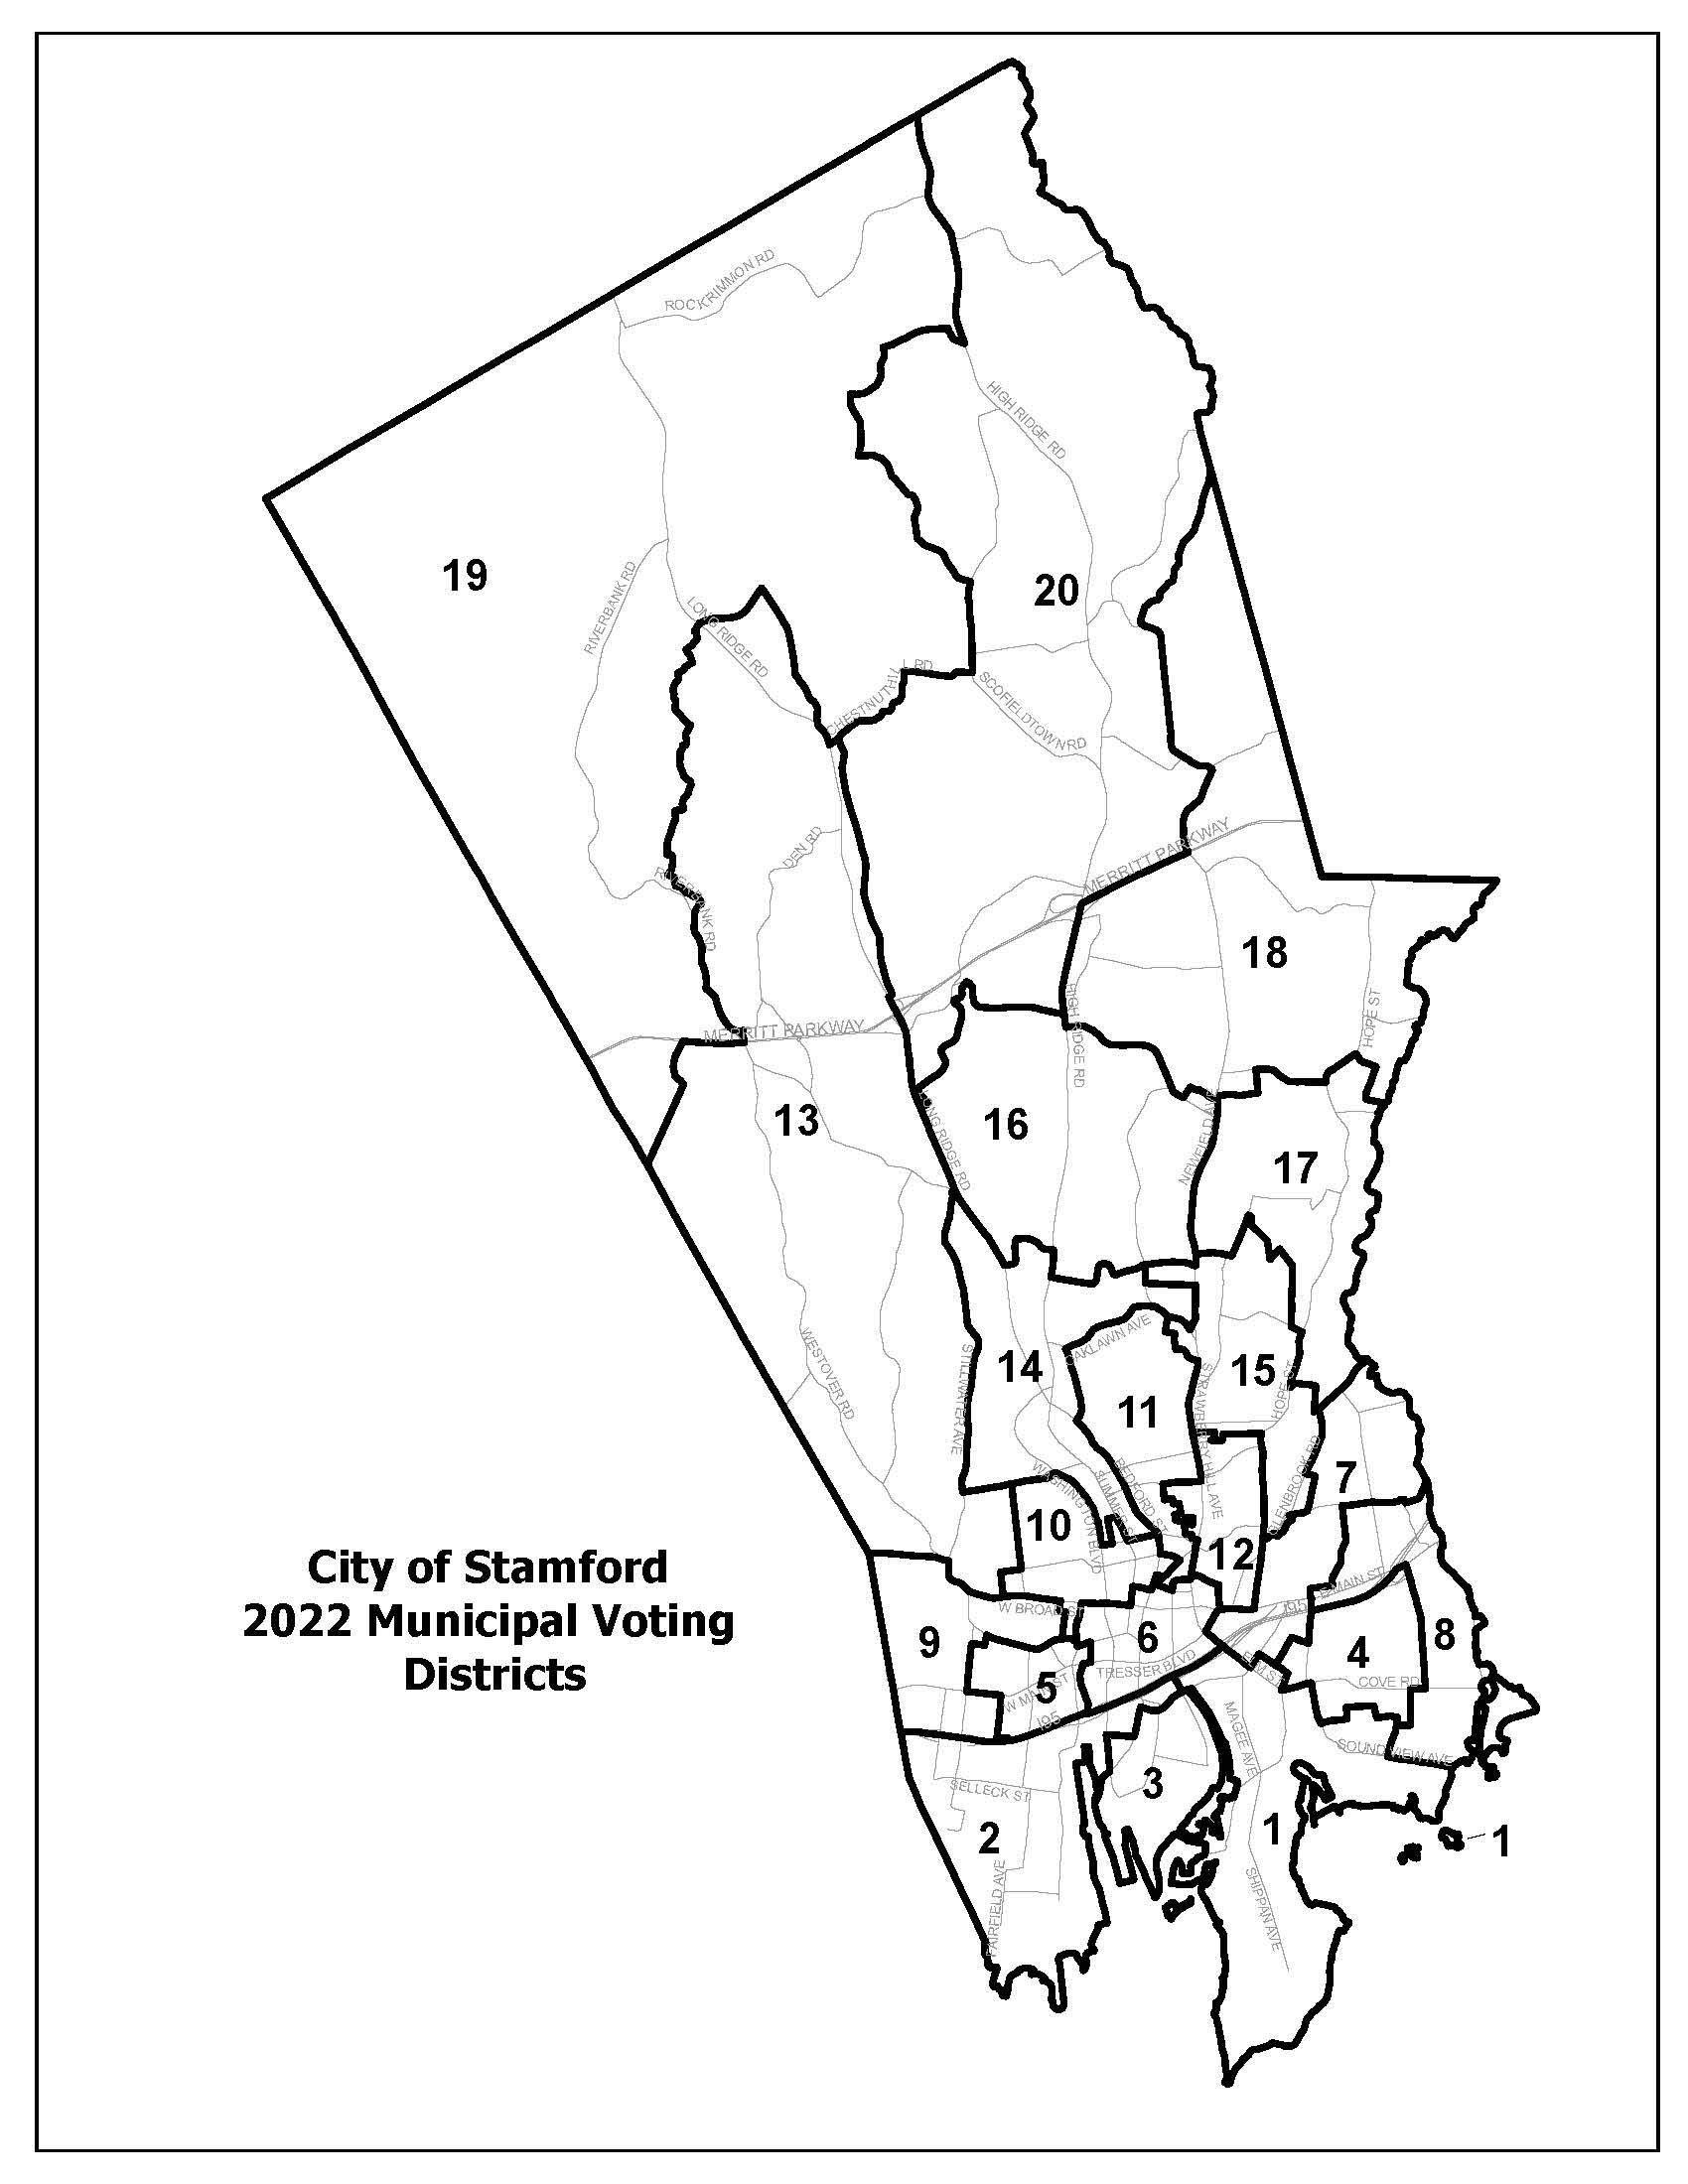 City of Stamford 2024 Municipal Voting Districts